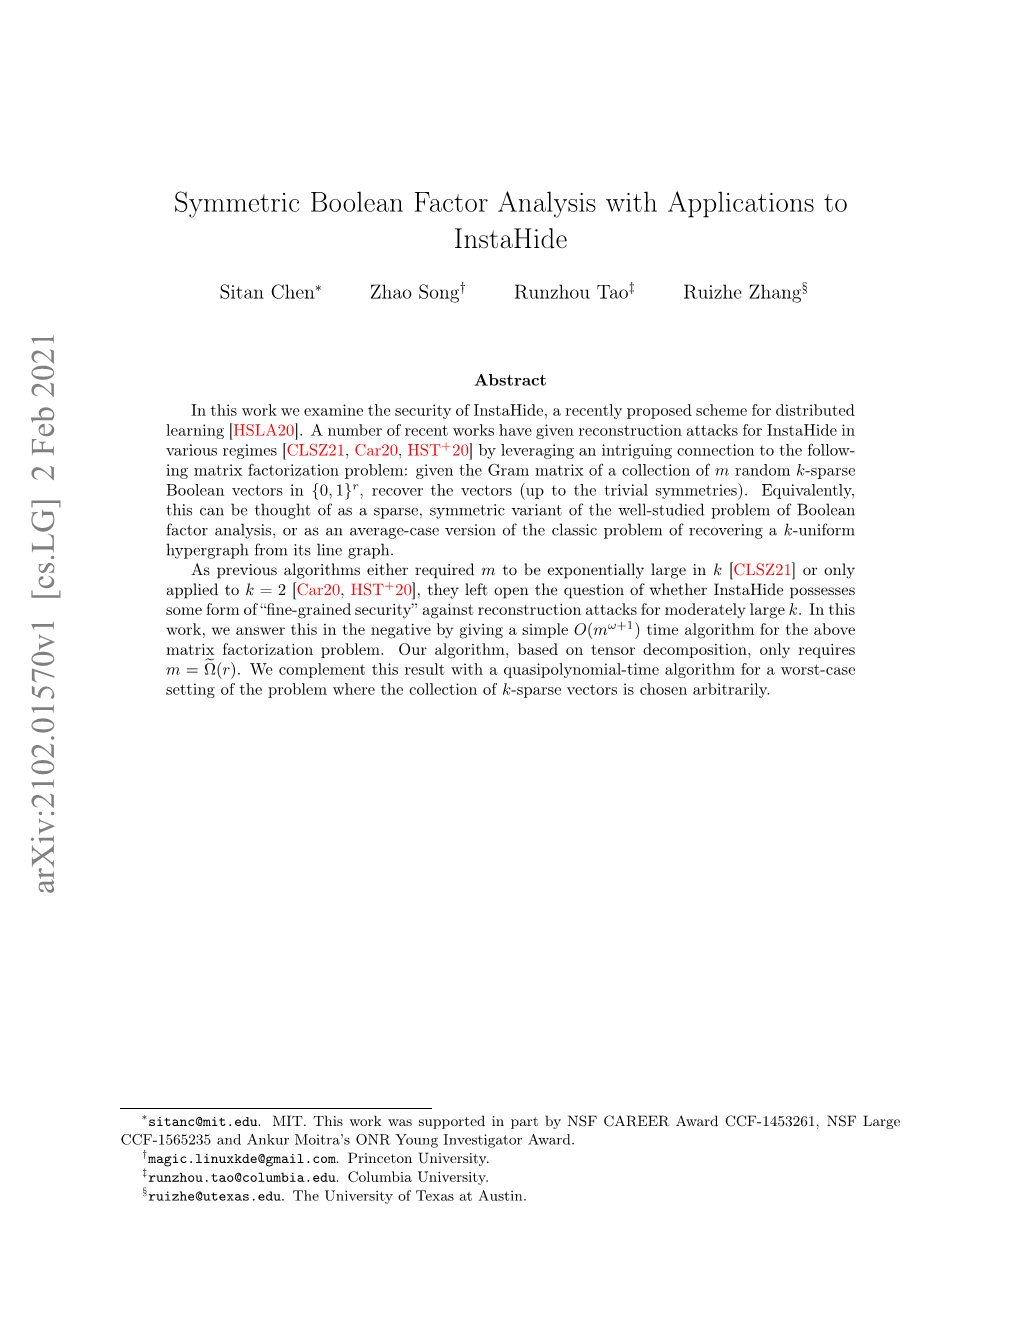 Symmetric Boolean Factor Analysis with Applications to Instahide